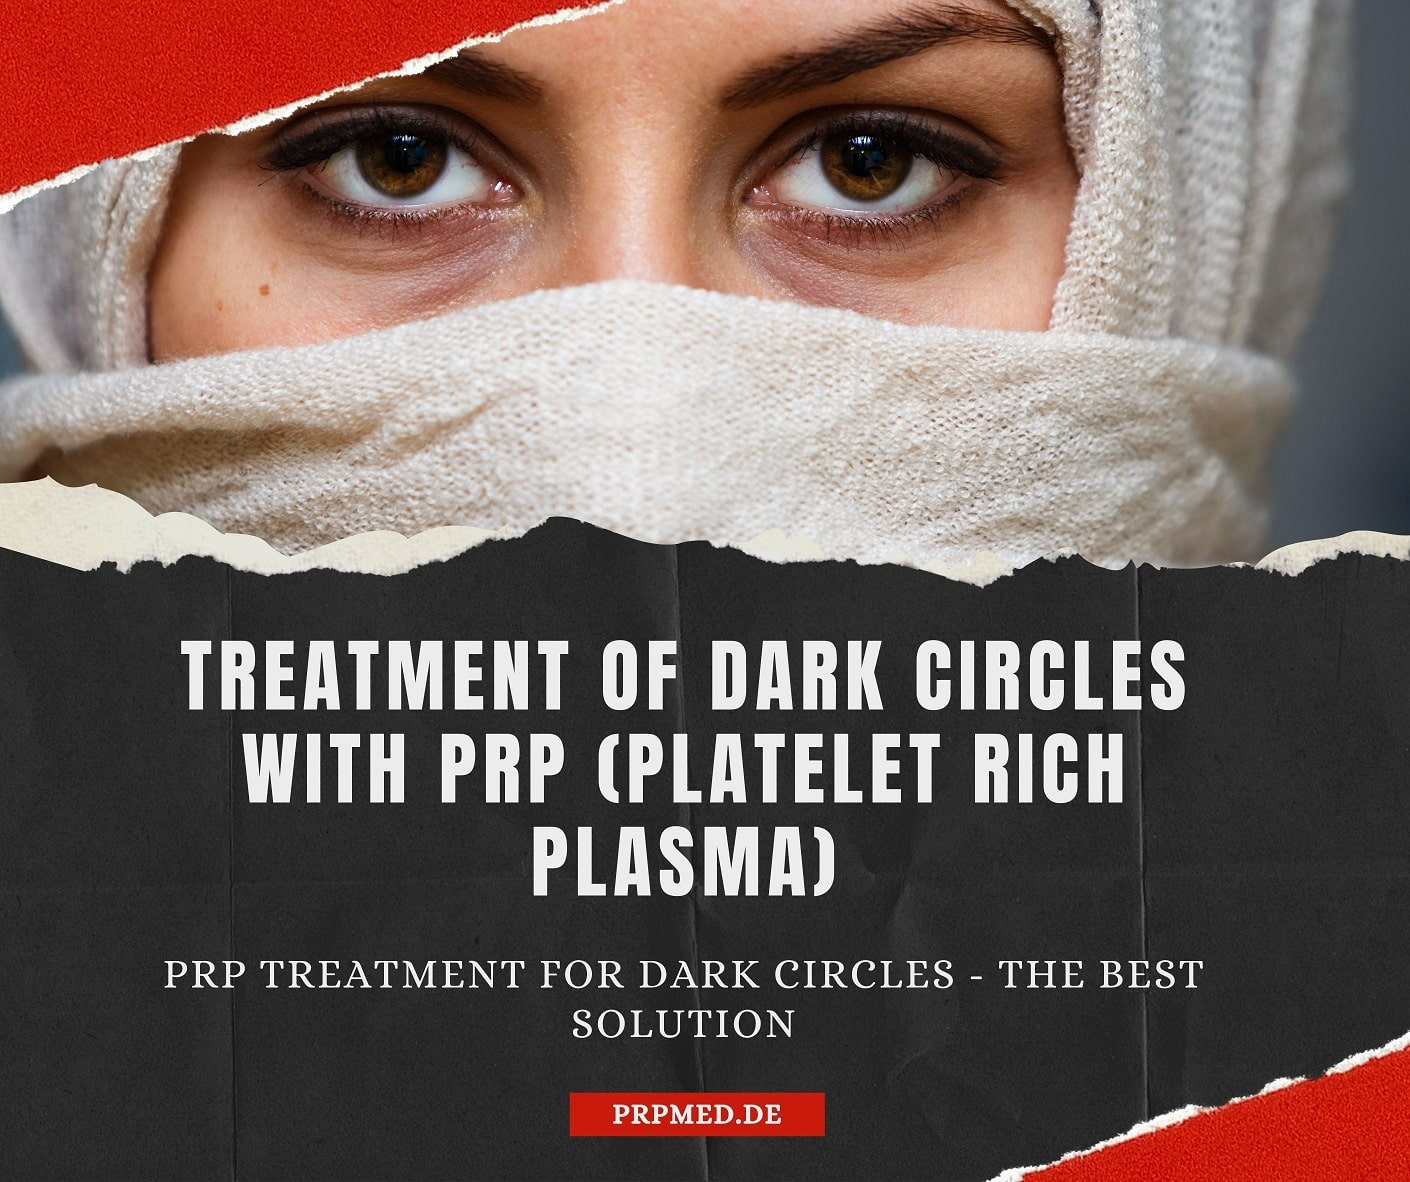 Treat dark circles with Vampire Lift / PRP therapy